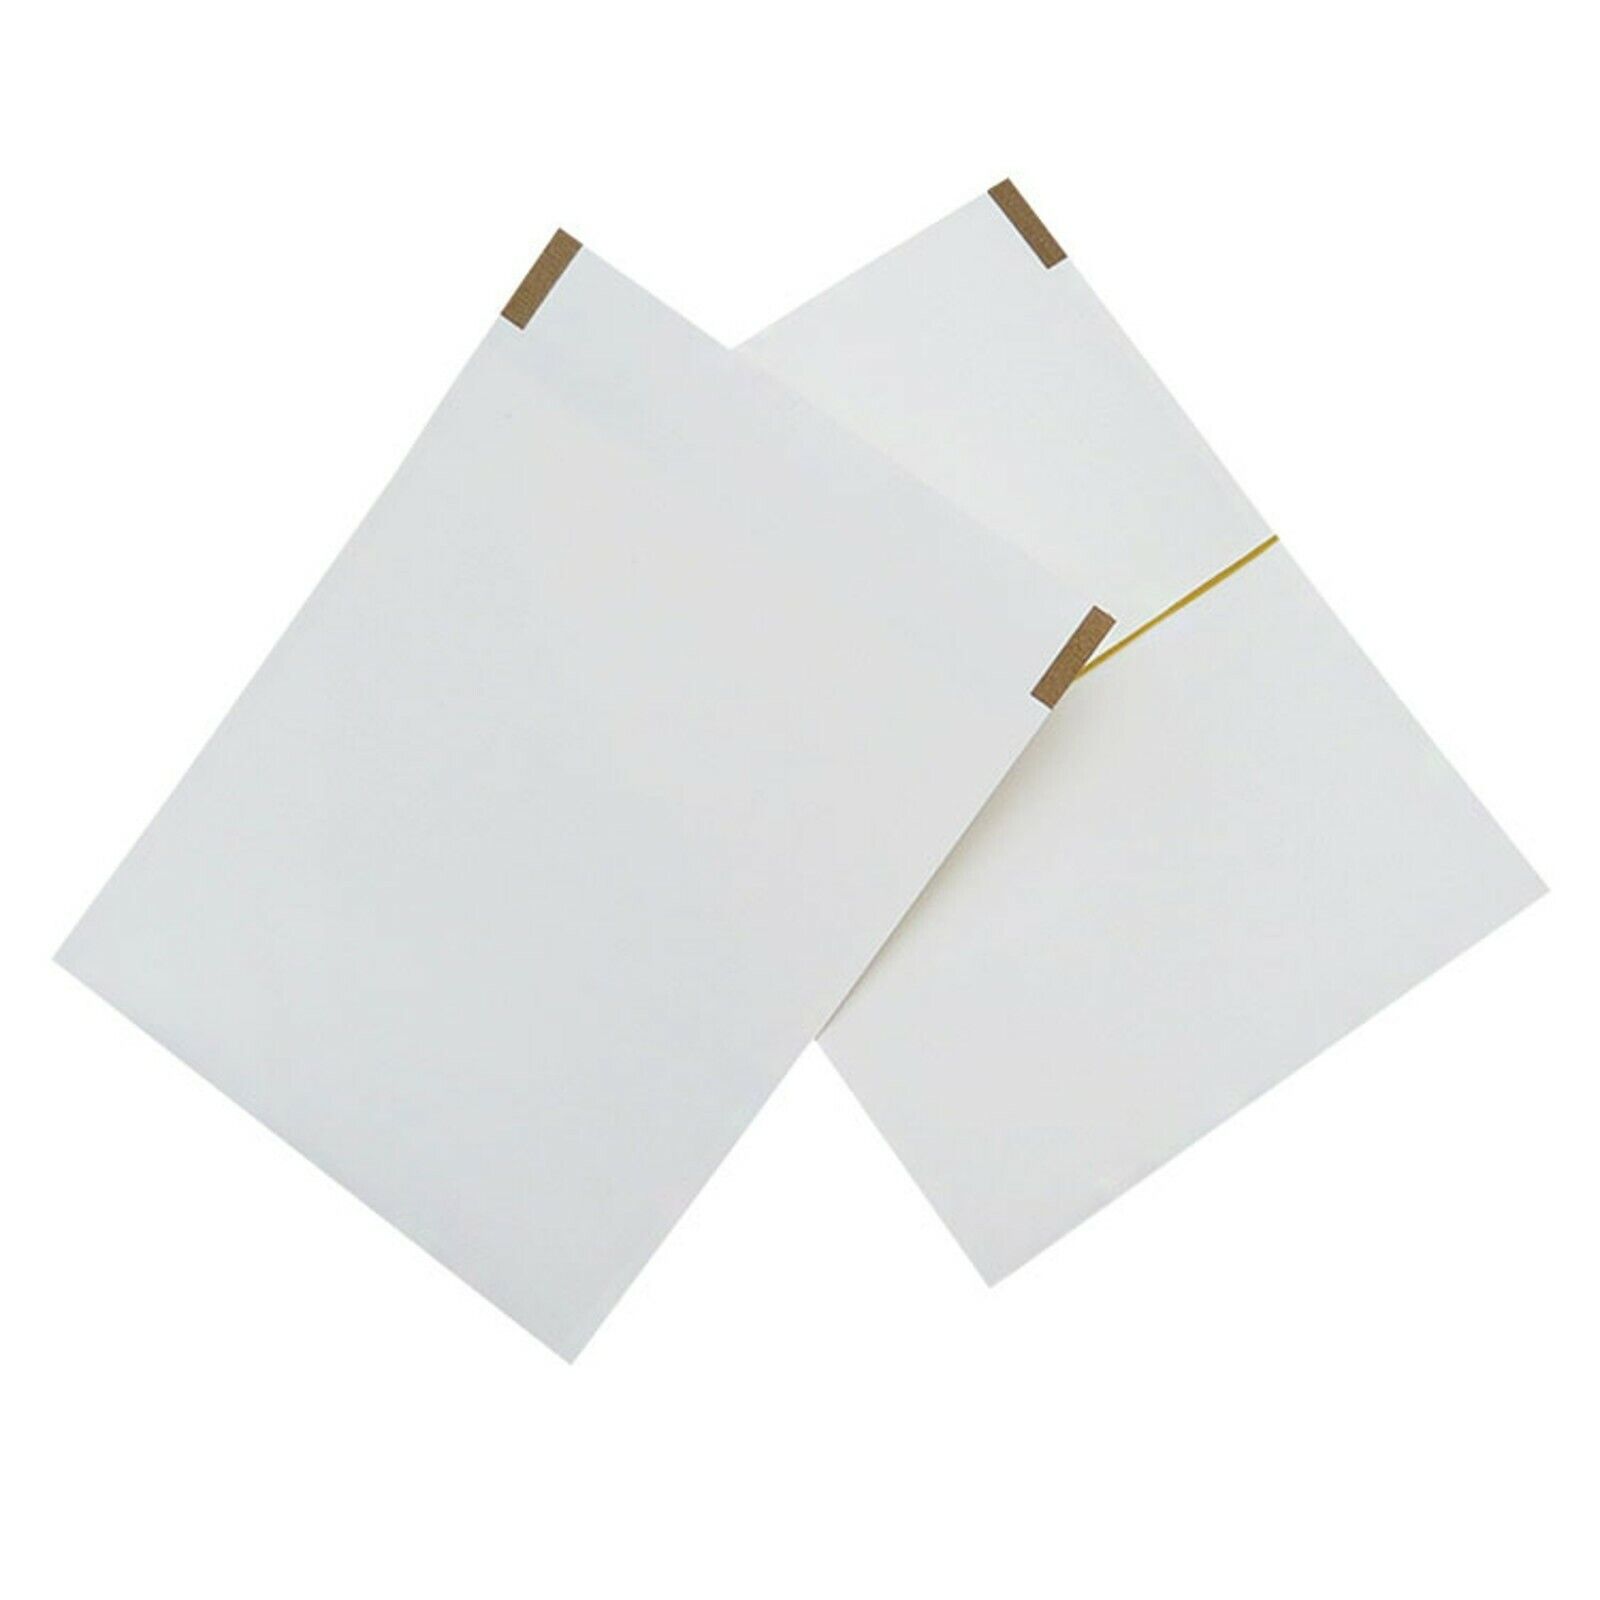 100 Small White Envelopes With Flap Seed Craft Jewelry Coins Stamps Parts